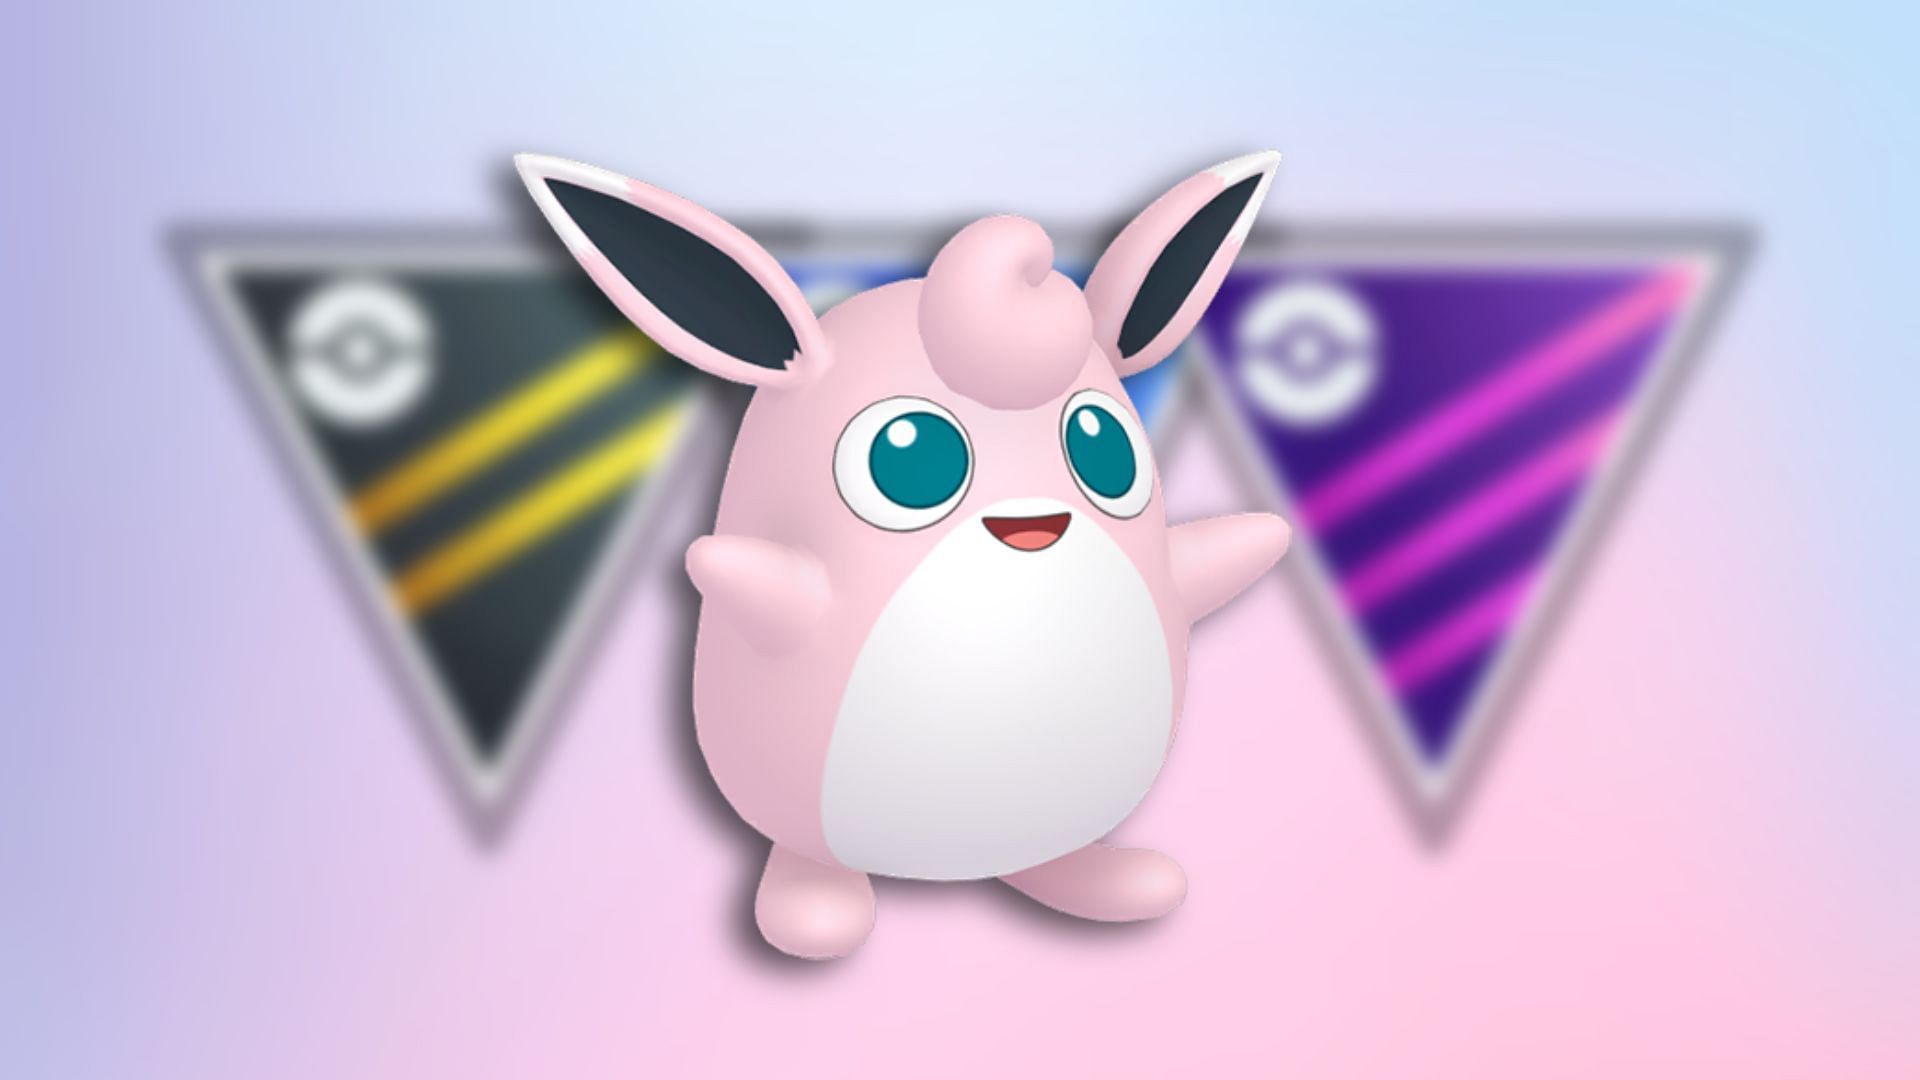 Pokemon go - Wigglytuff PvP and PvE guide